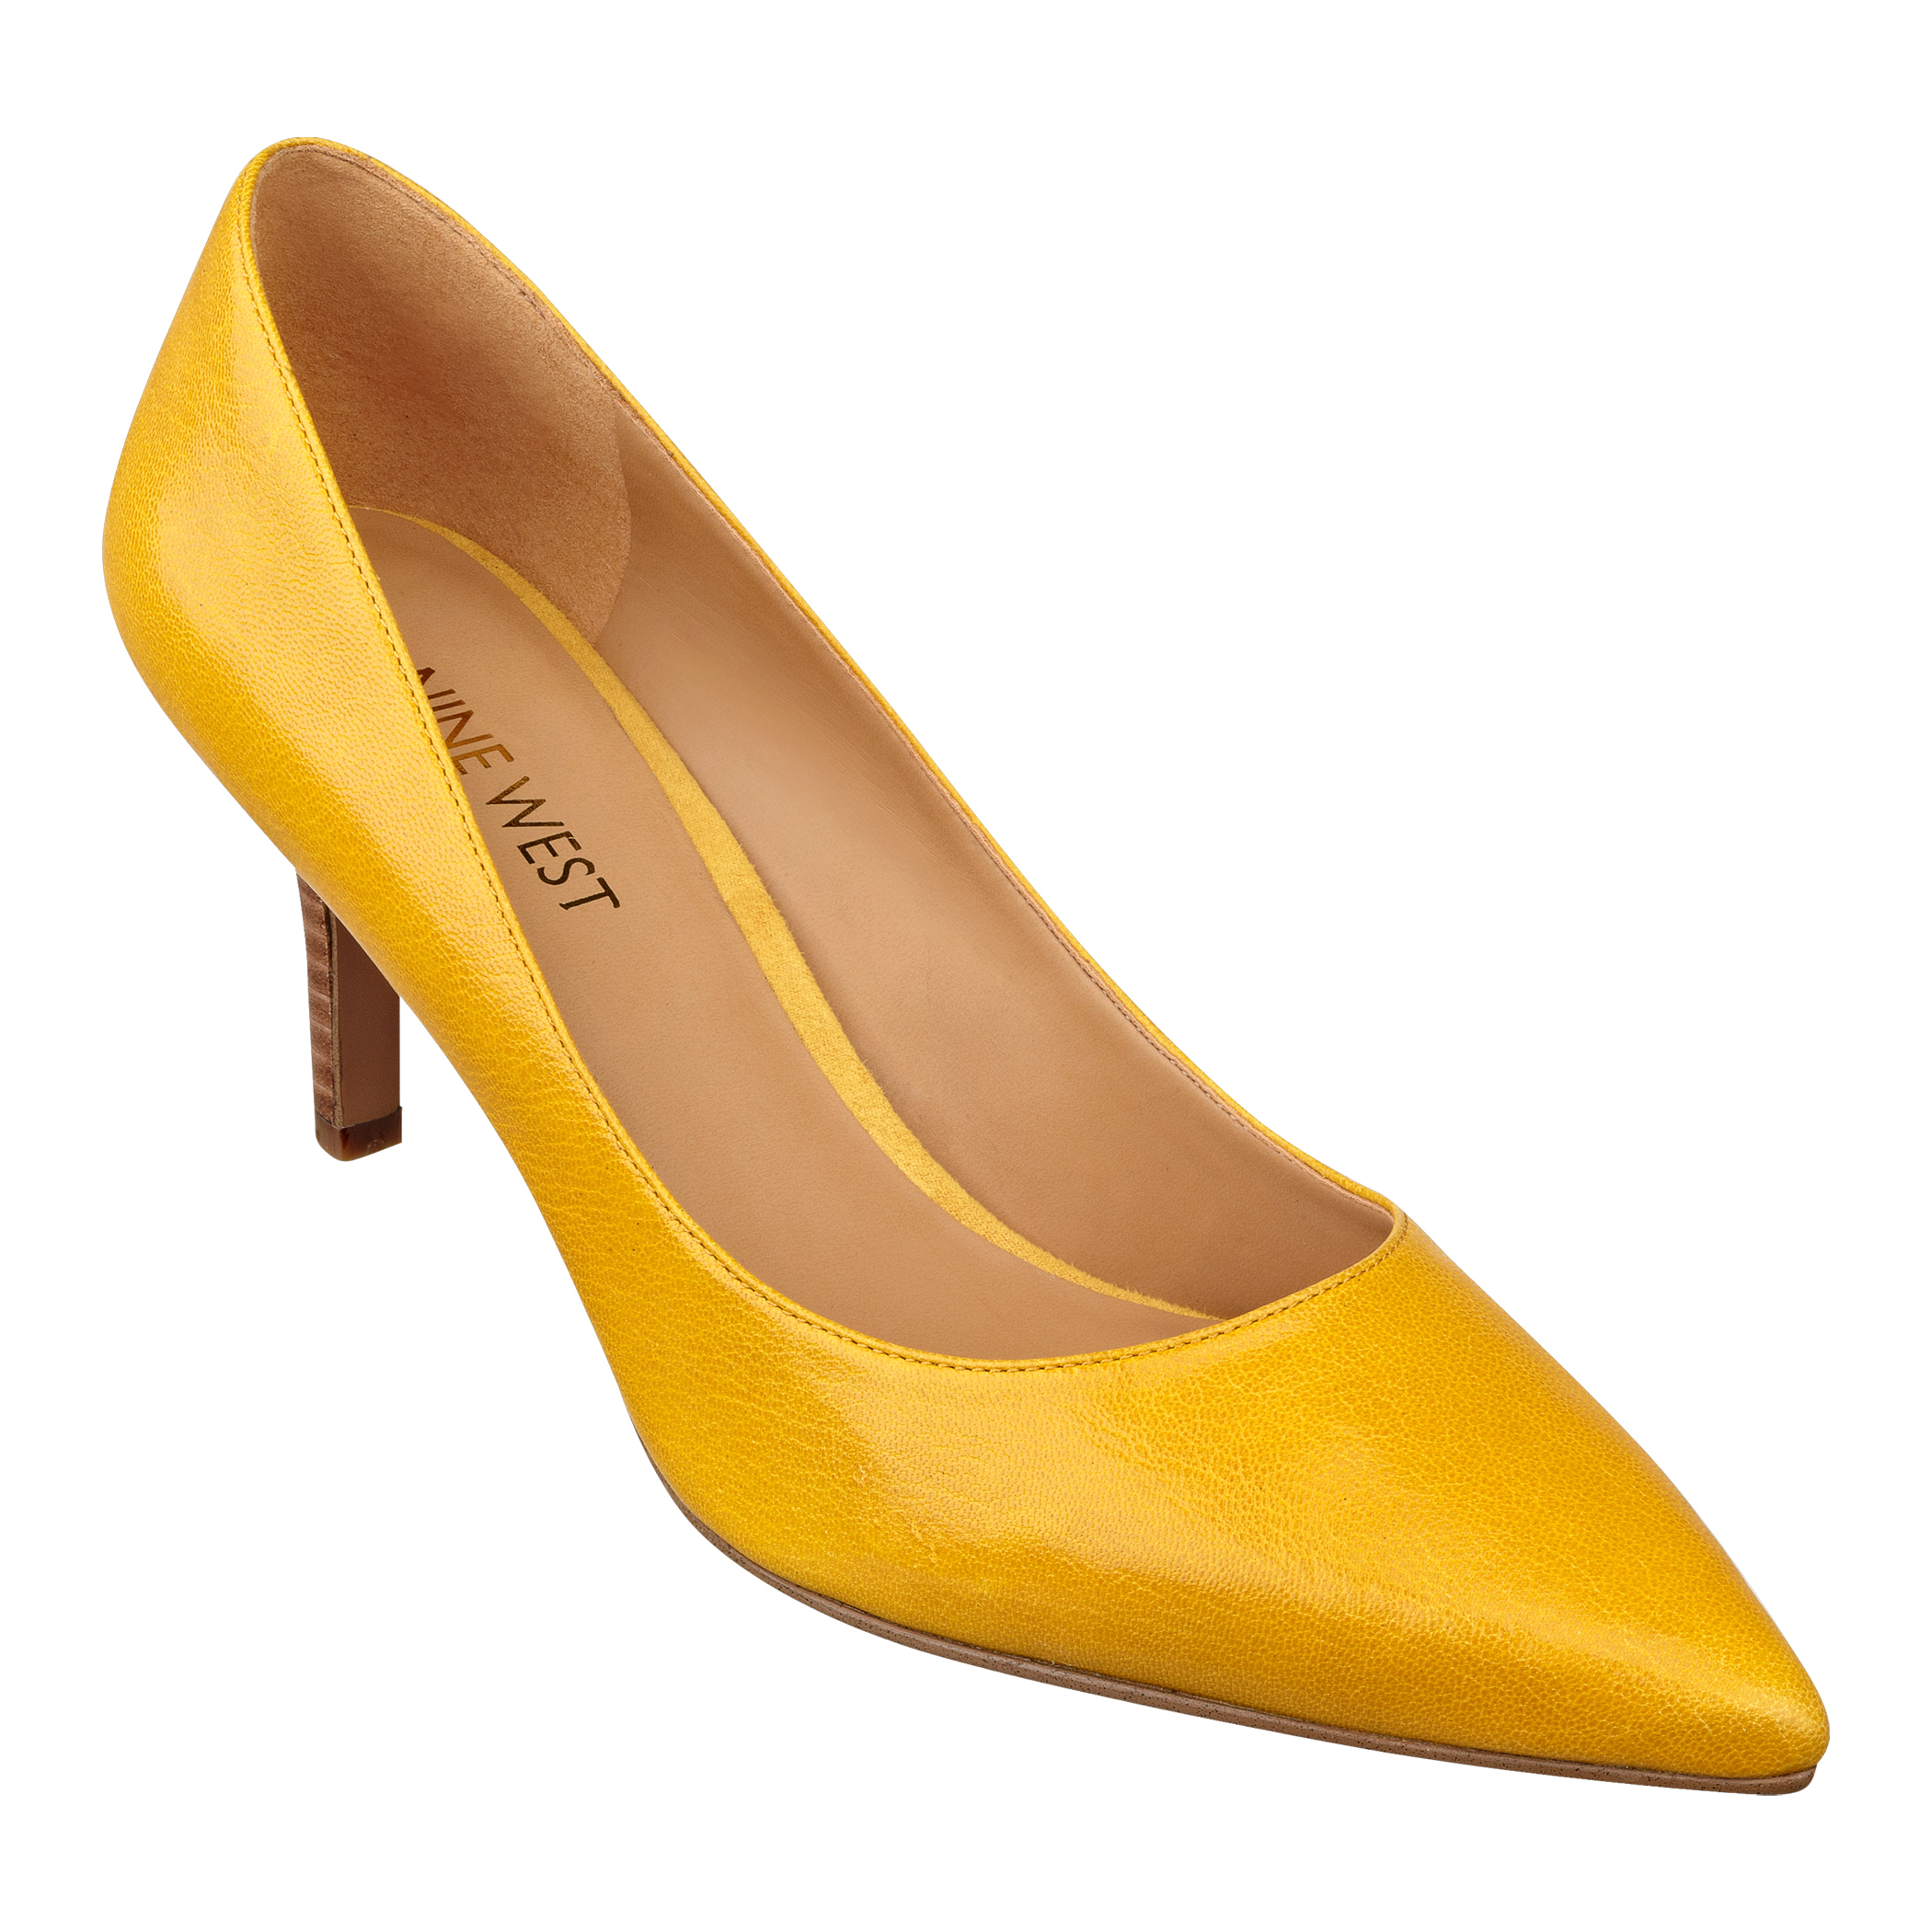 Lyst - Nine West Andriana Pointy Toe Pumps in Yellow